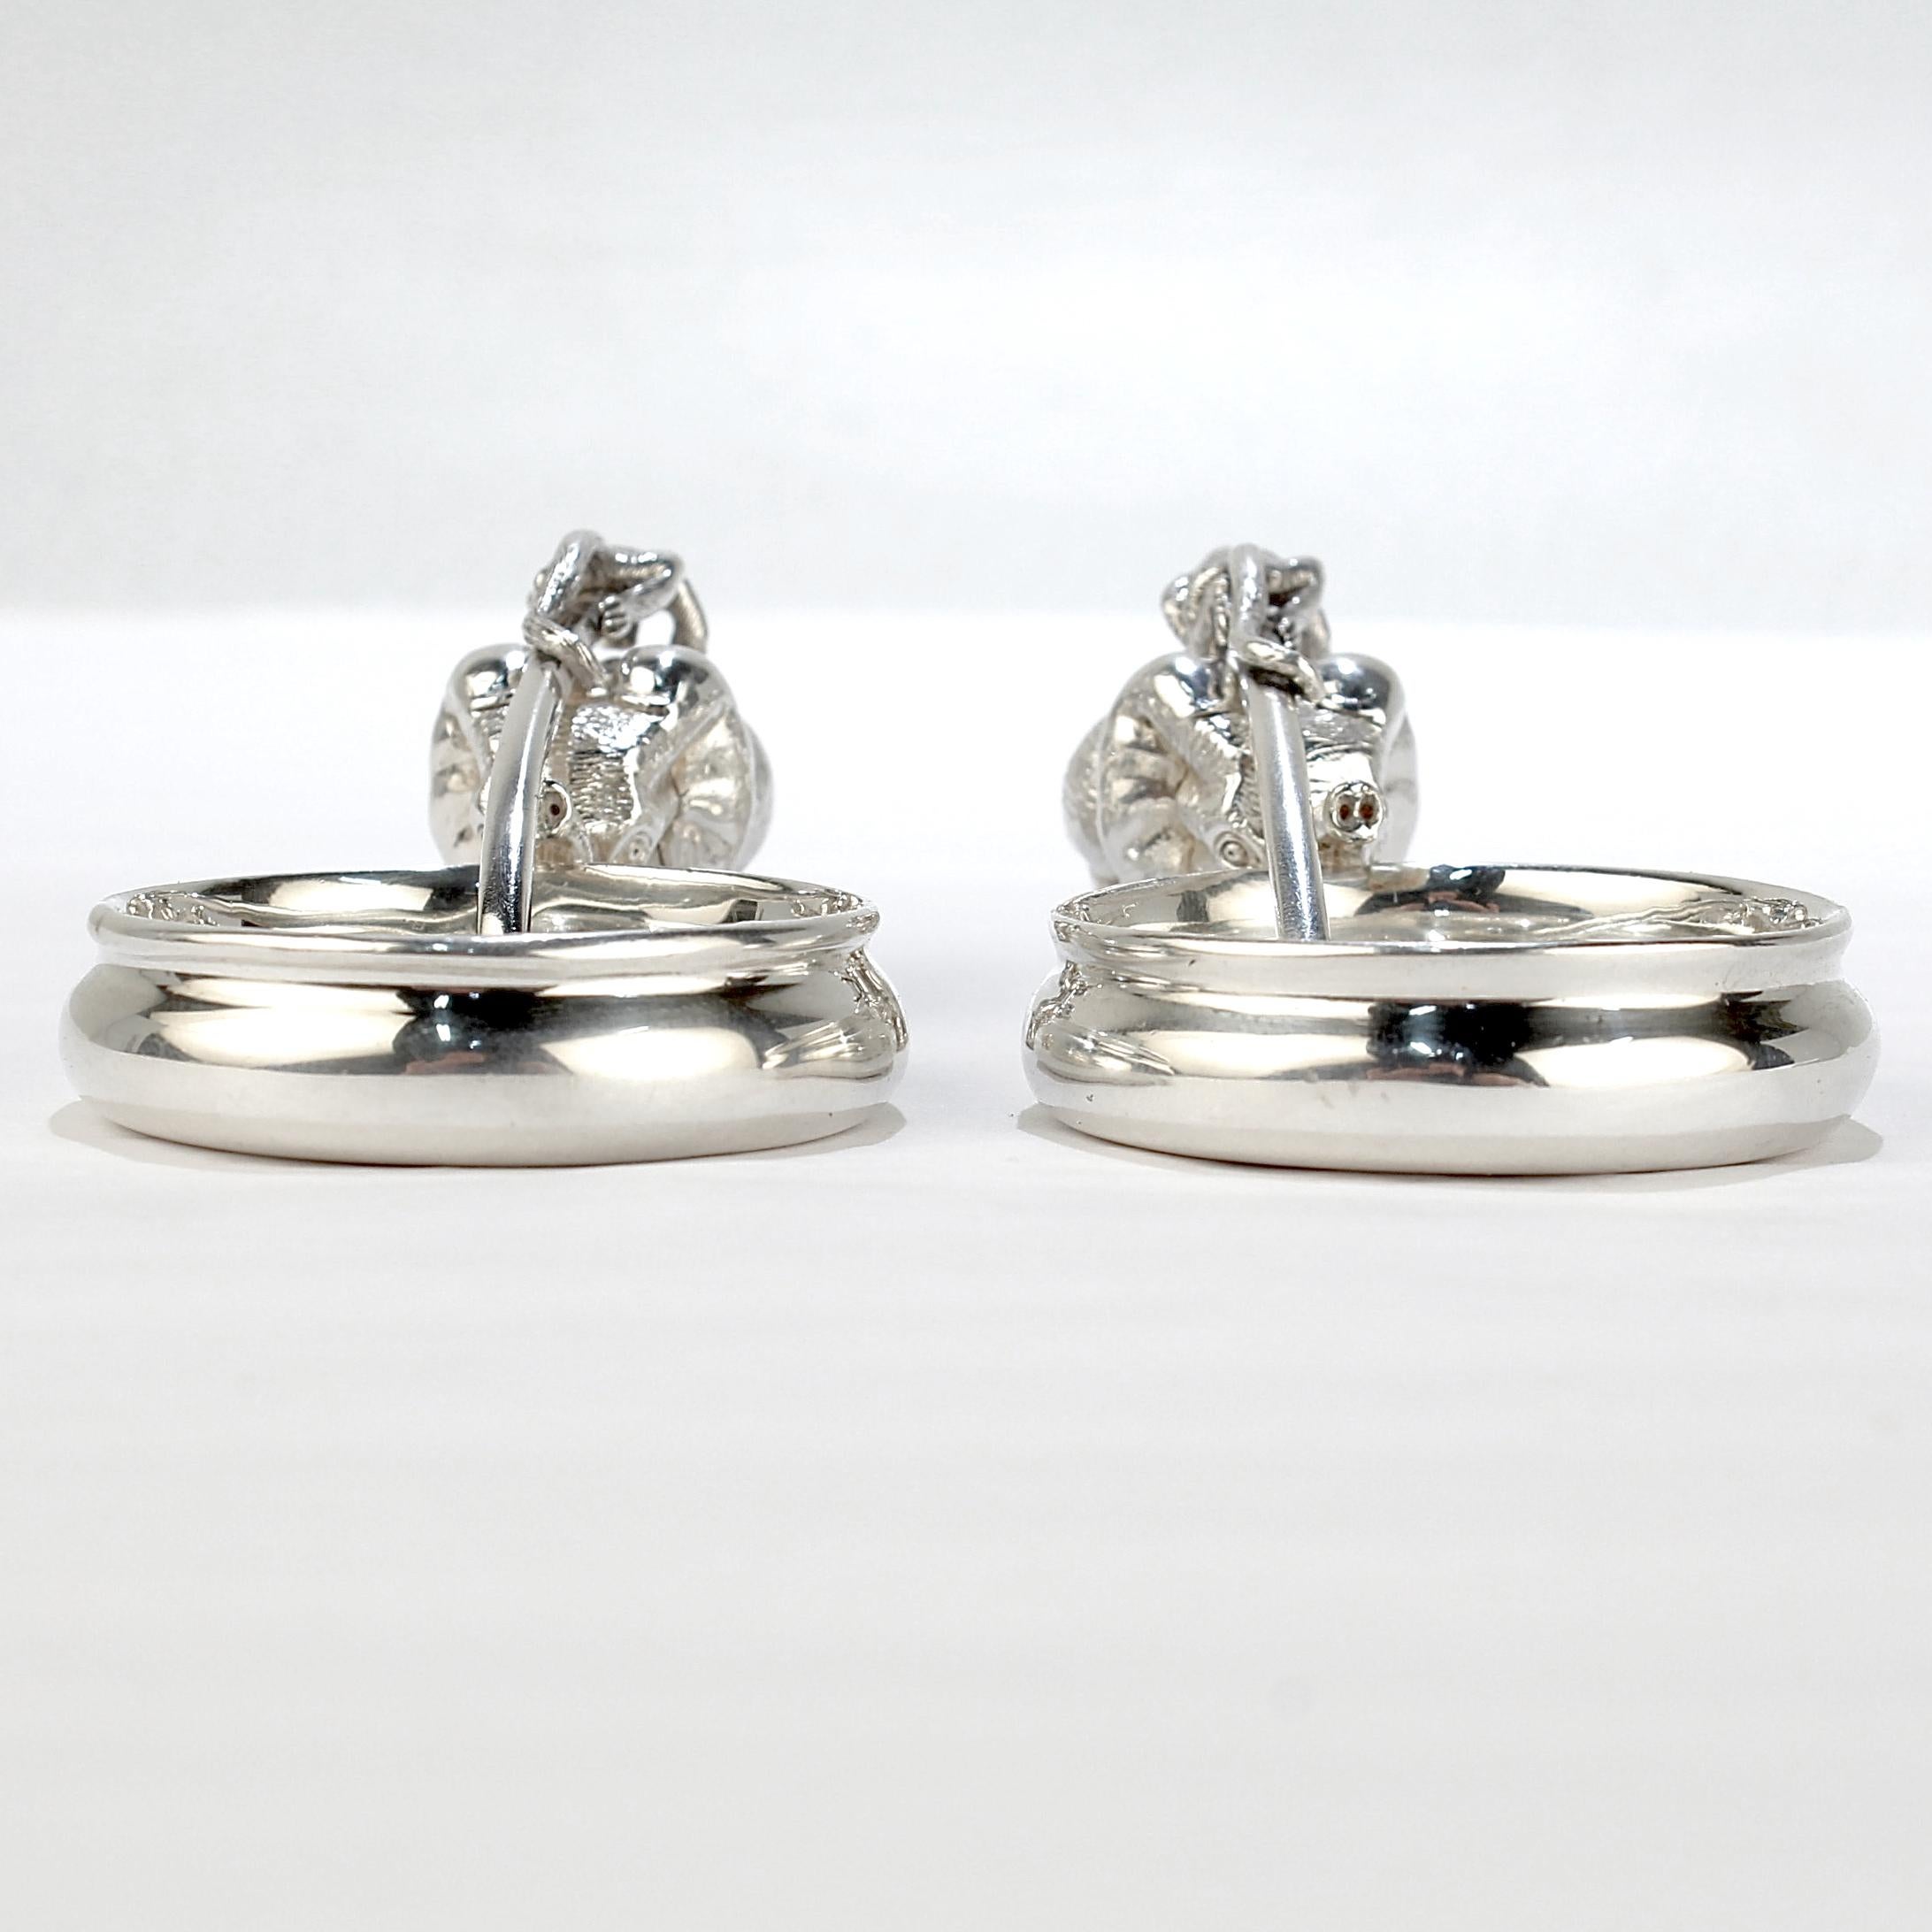 Pair of Patrick Mavros Elephant & Monkey Sterling Silver Mustard Pots & Spoons For Sale 1